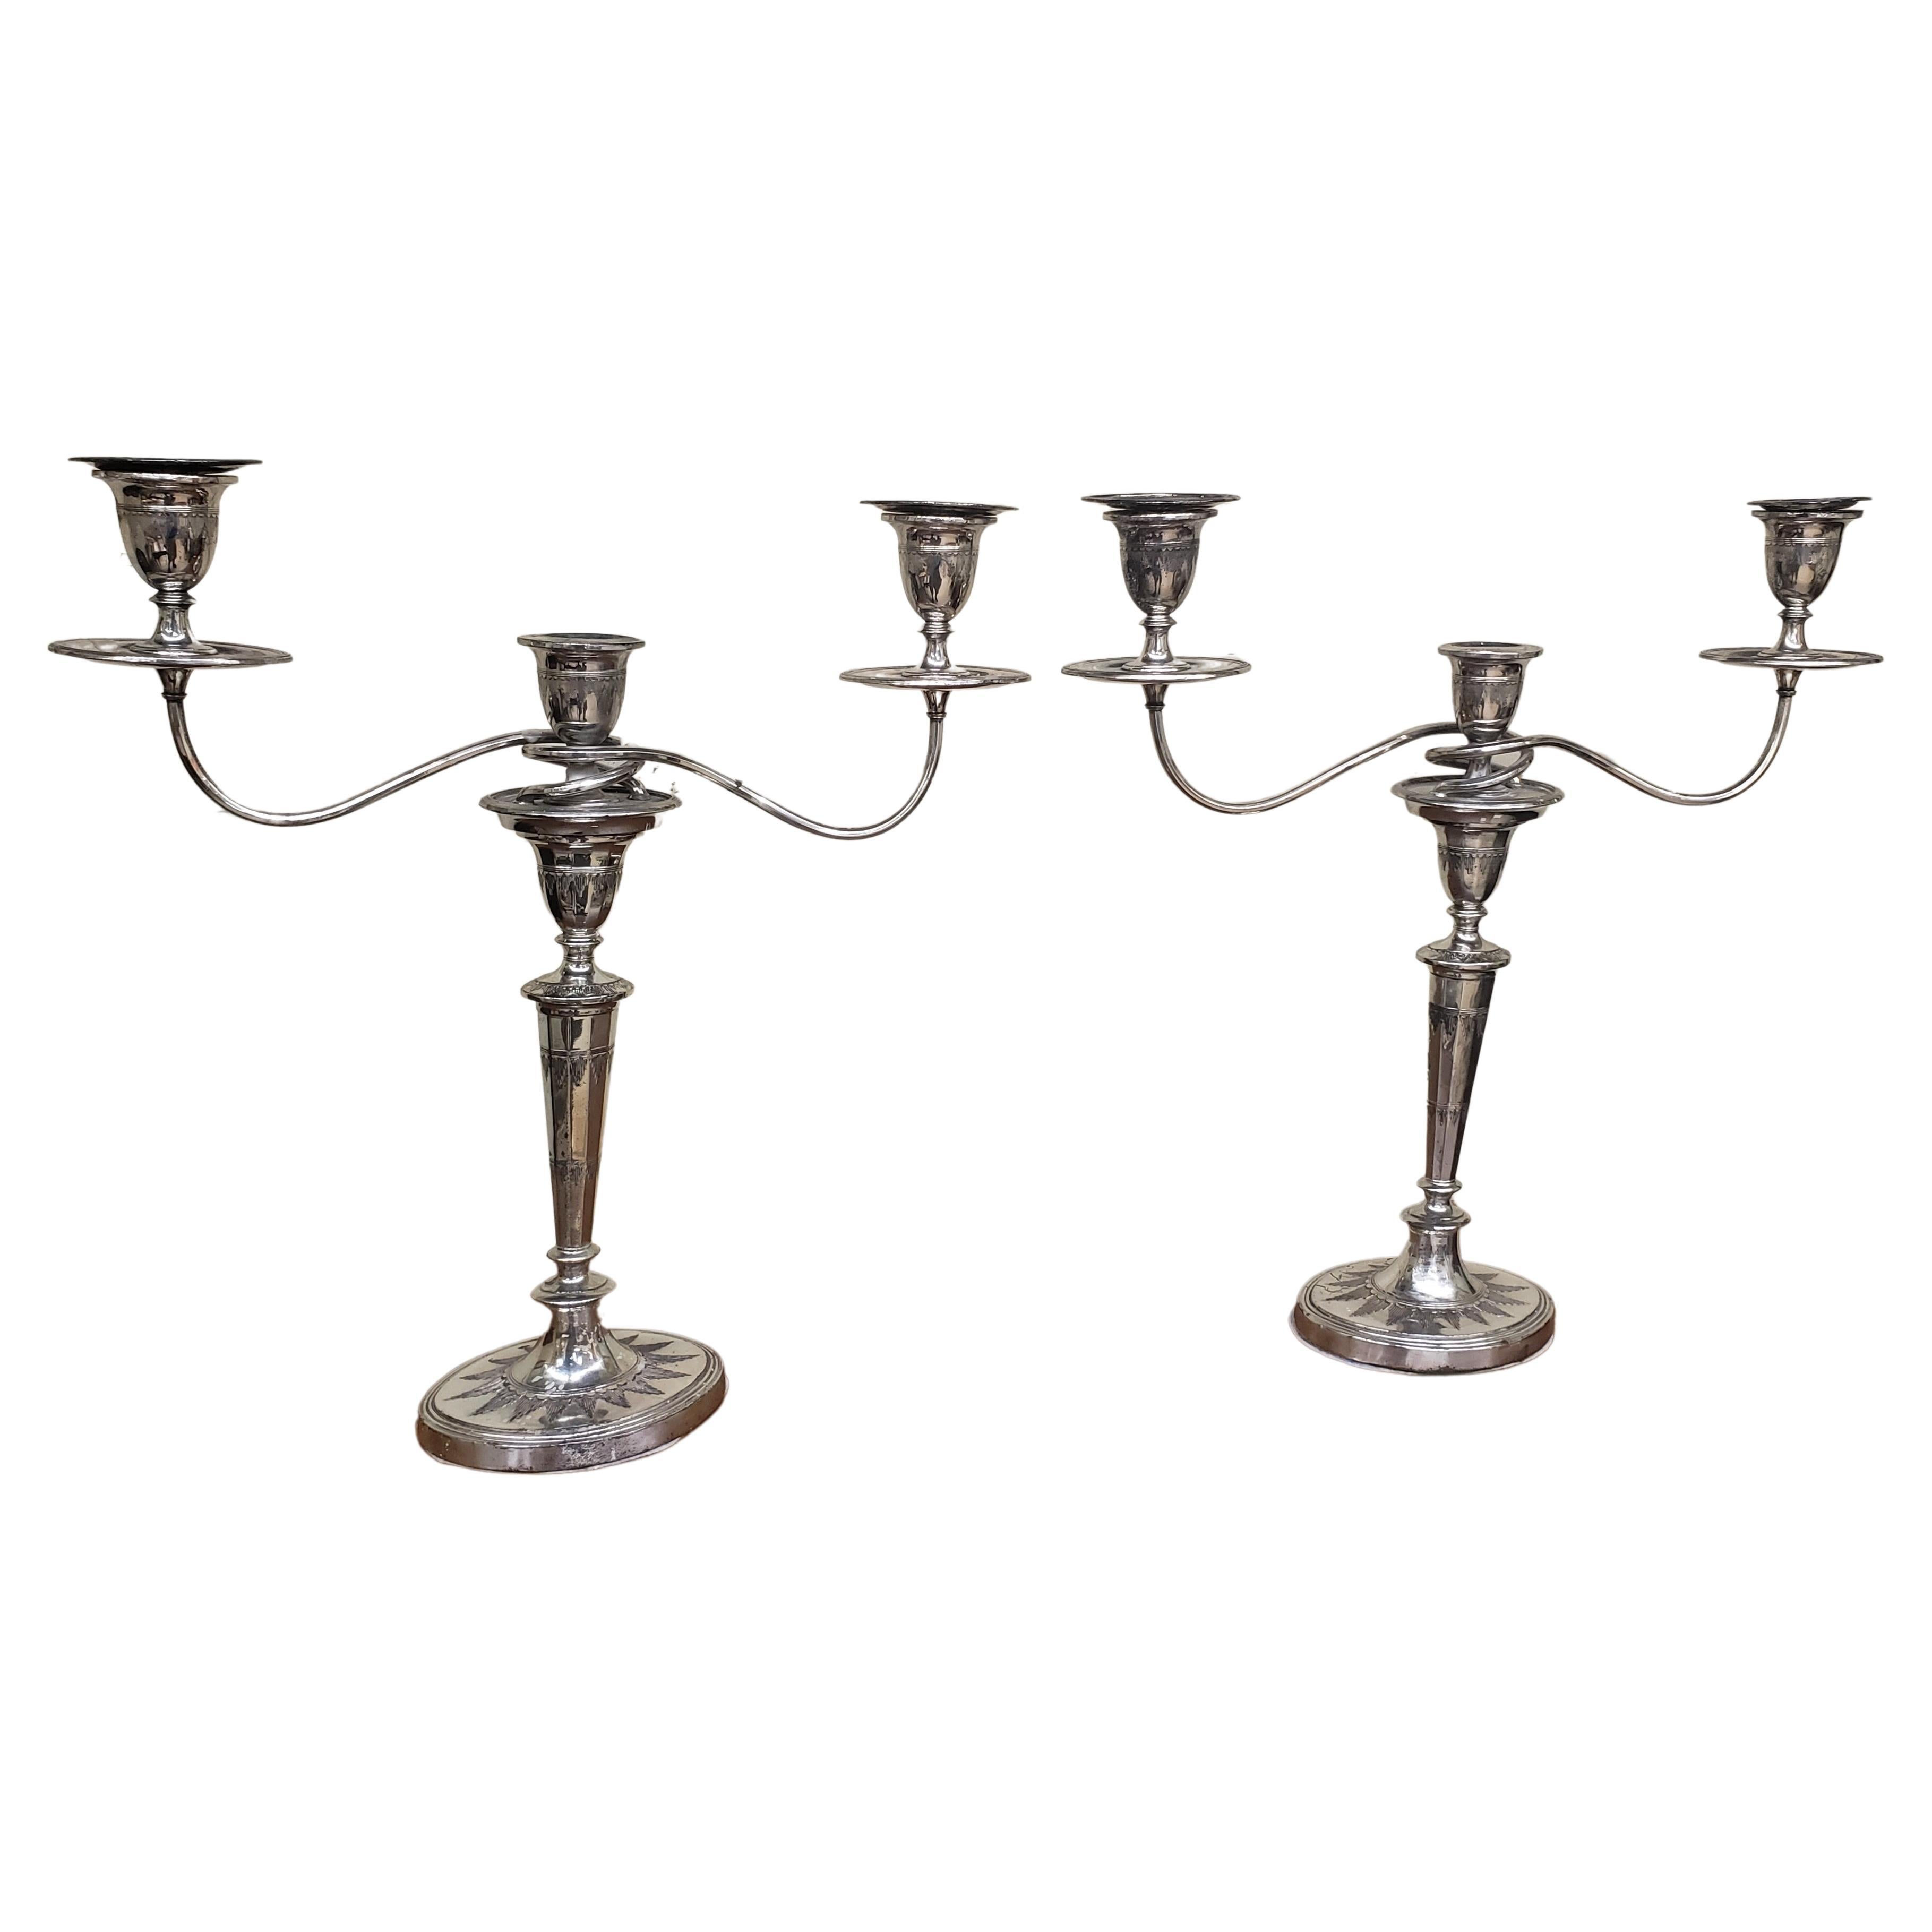 Pair of silverplate convertible three-light candelabra. Measure 18 inches wide, 4 inches deep, 19 inches tall. Oval base is 6 inches wide.